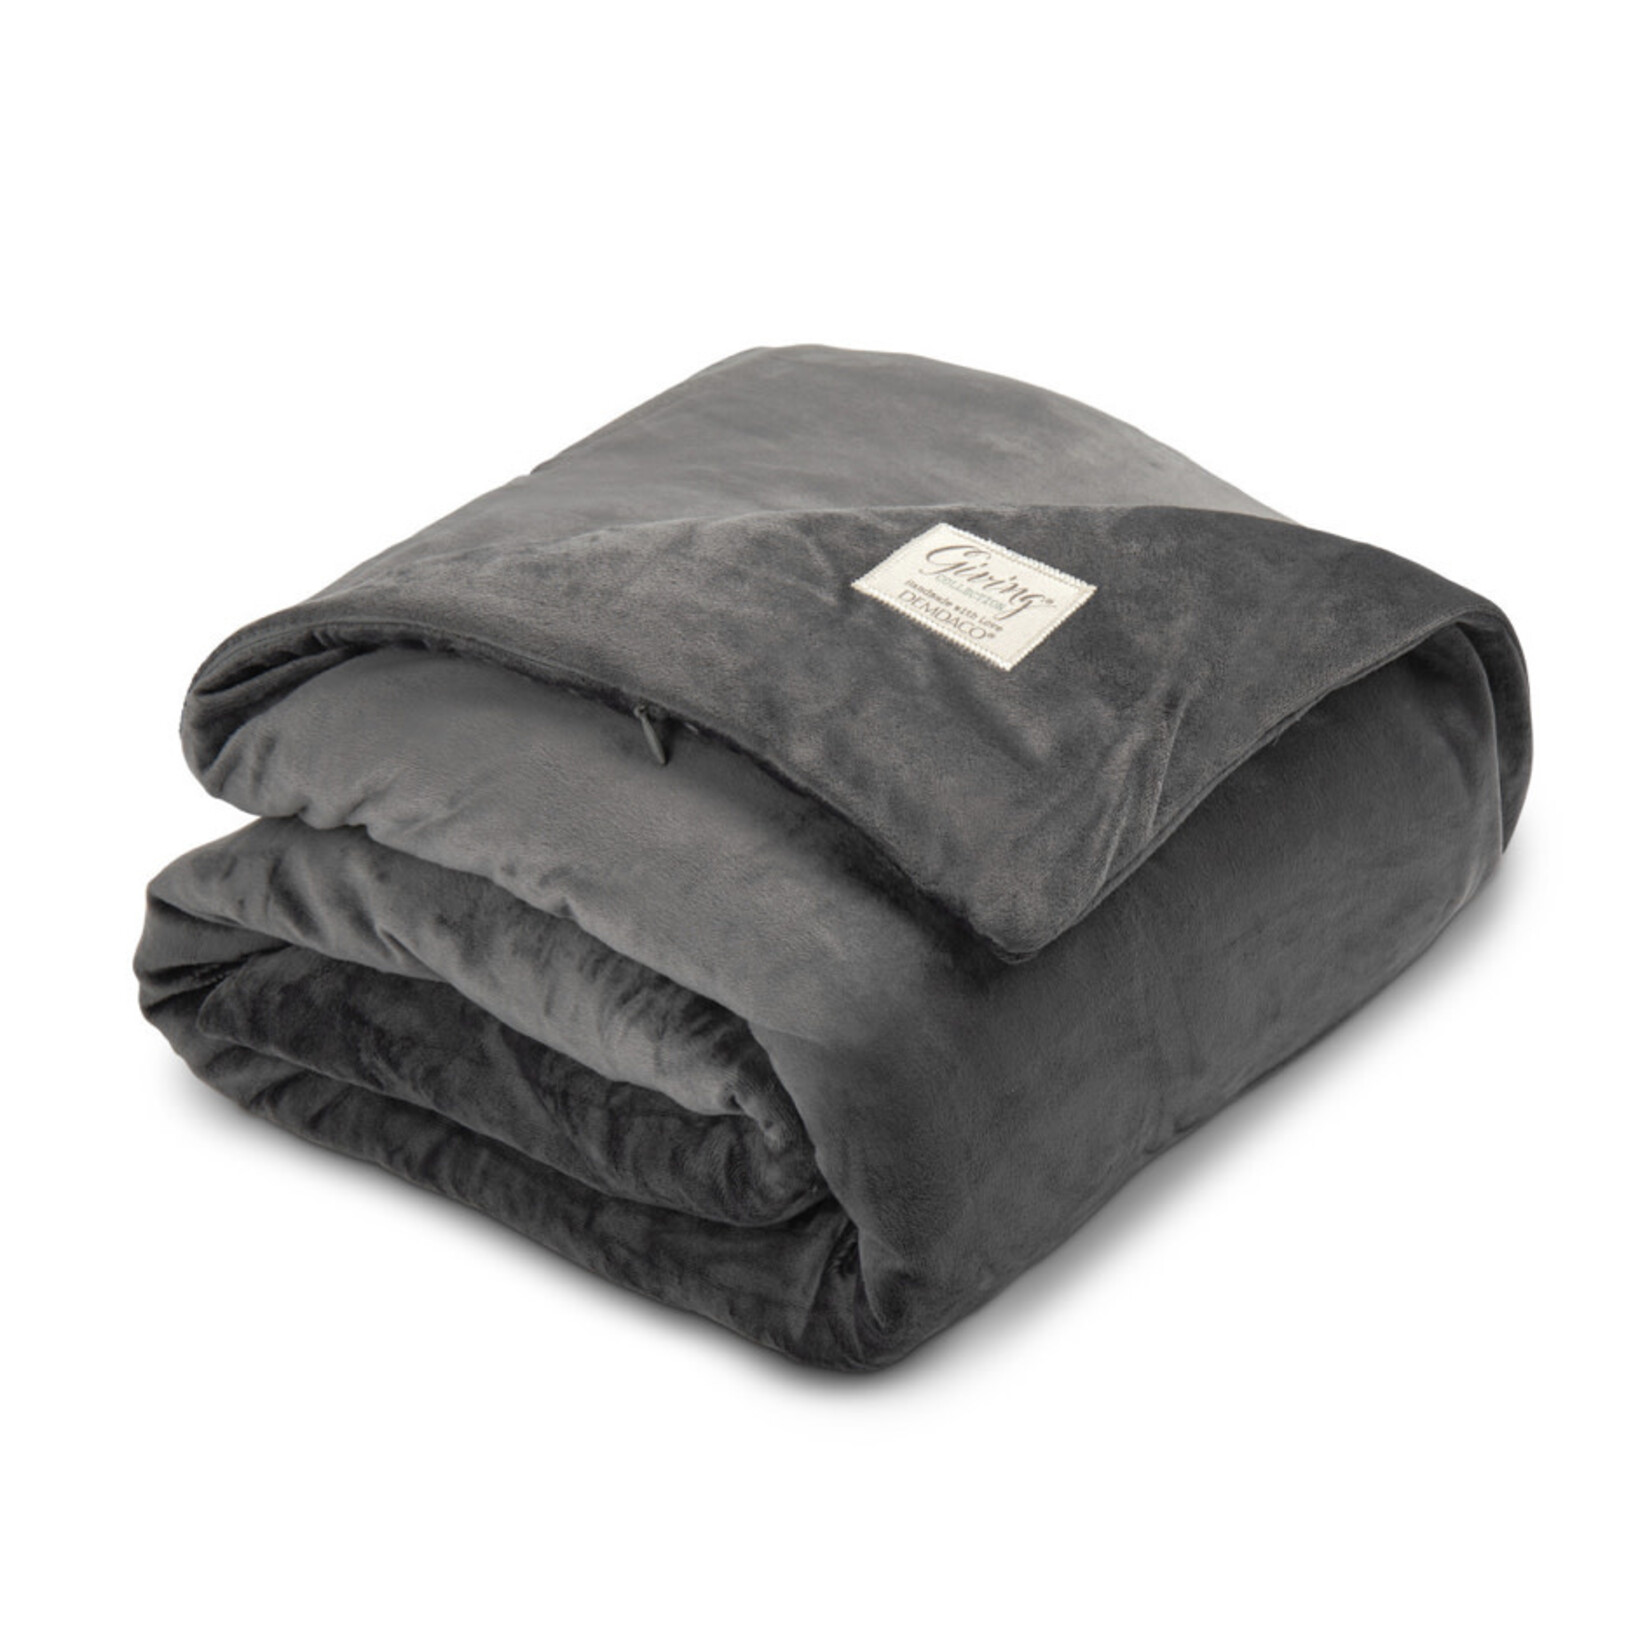 Demdaco Weighted Throw Blanket Charcoal